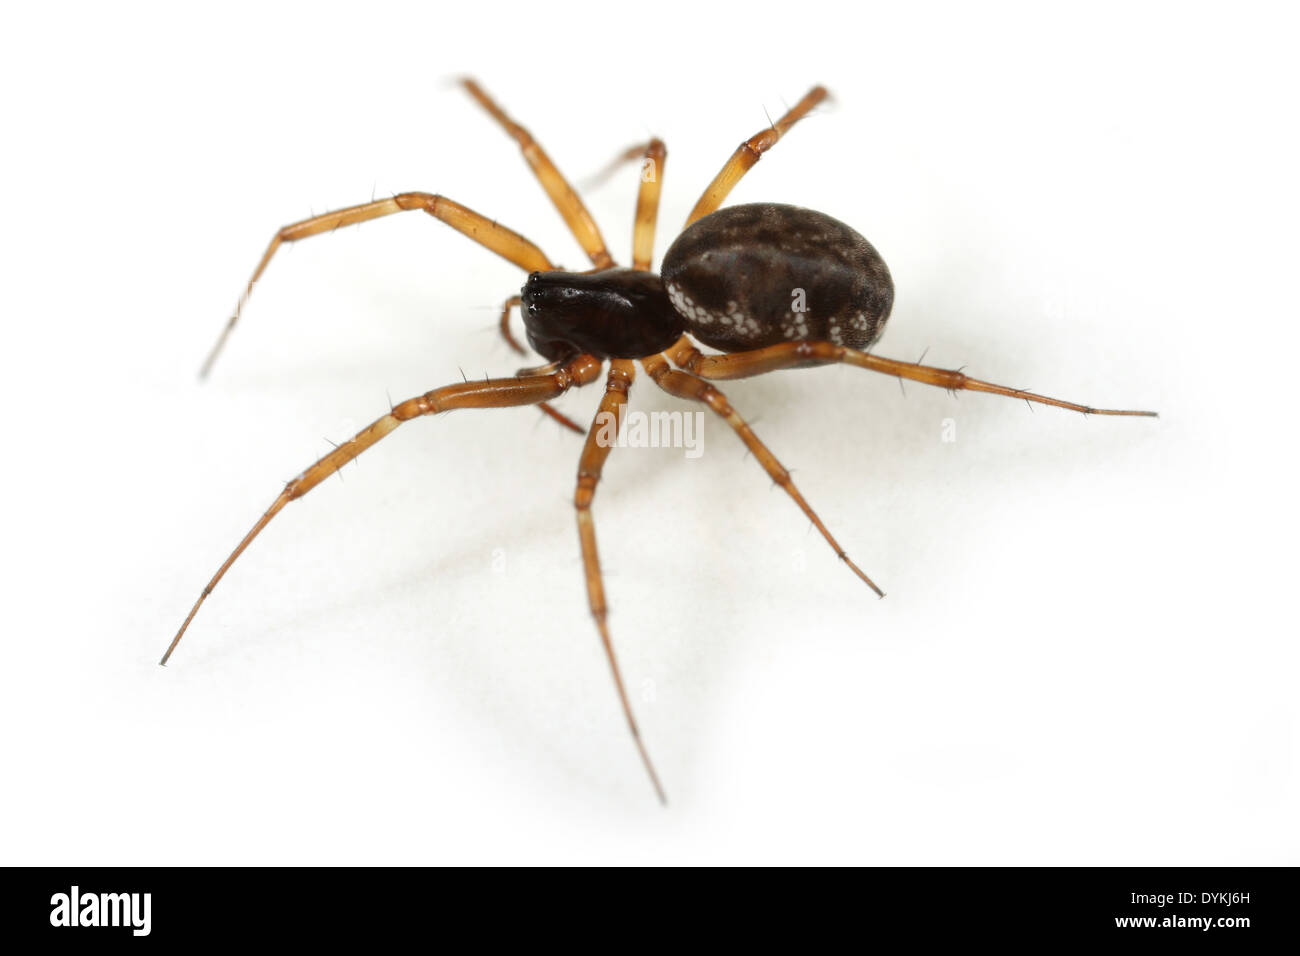 Neriene clathrata spider, part of the family Linyphiidae - sheetweb weavers. Stock Photo